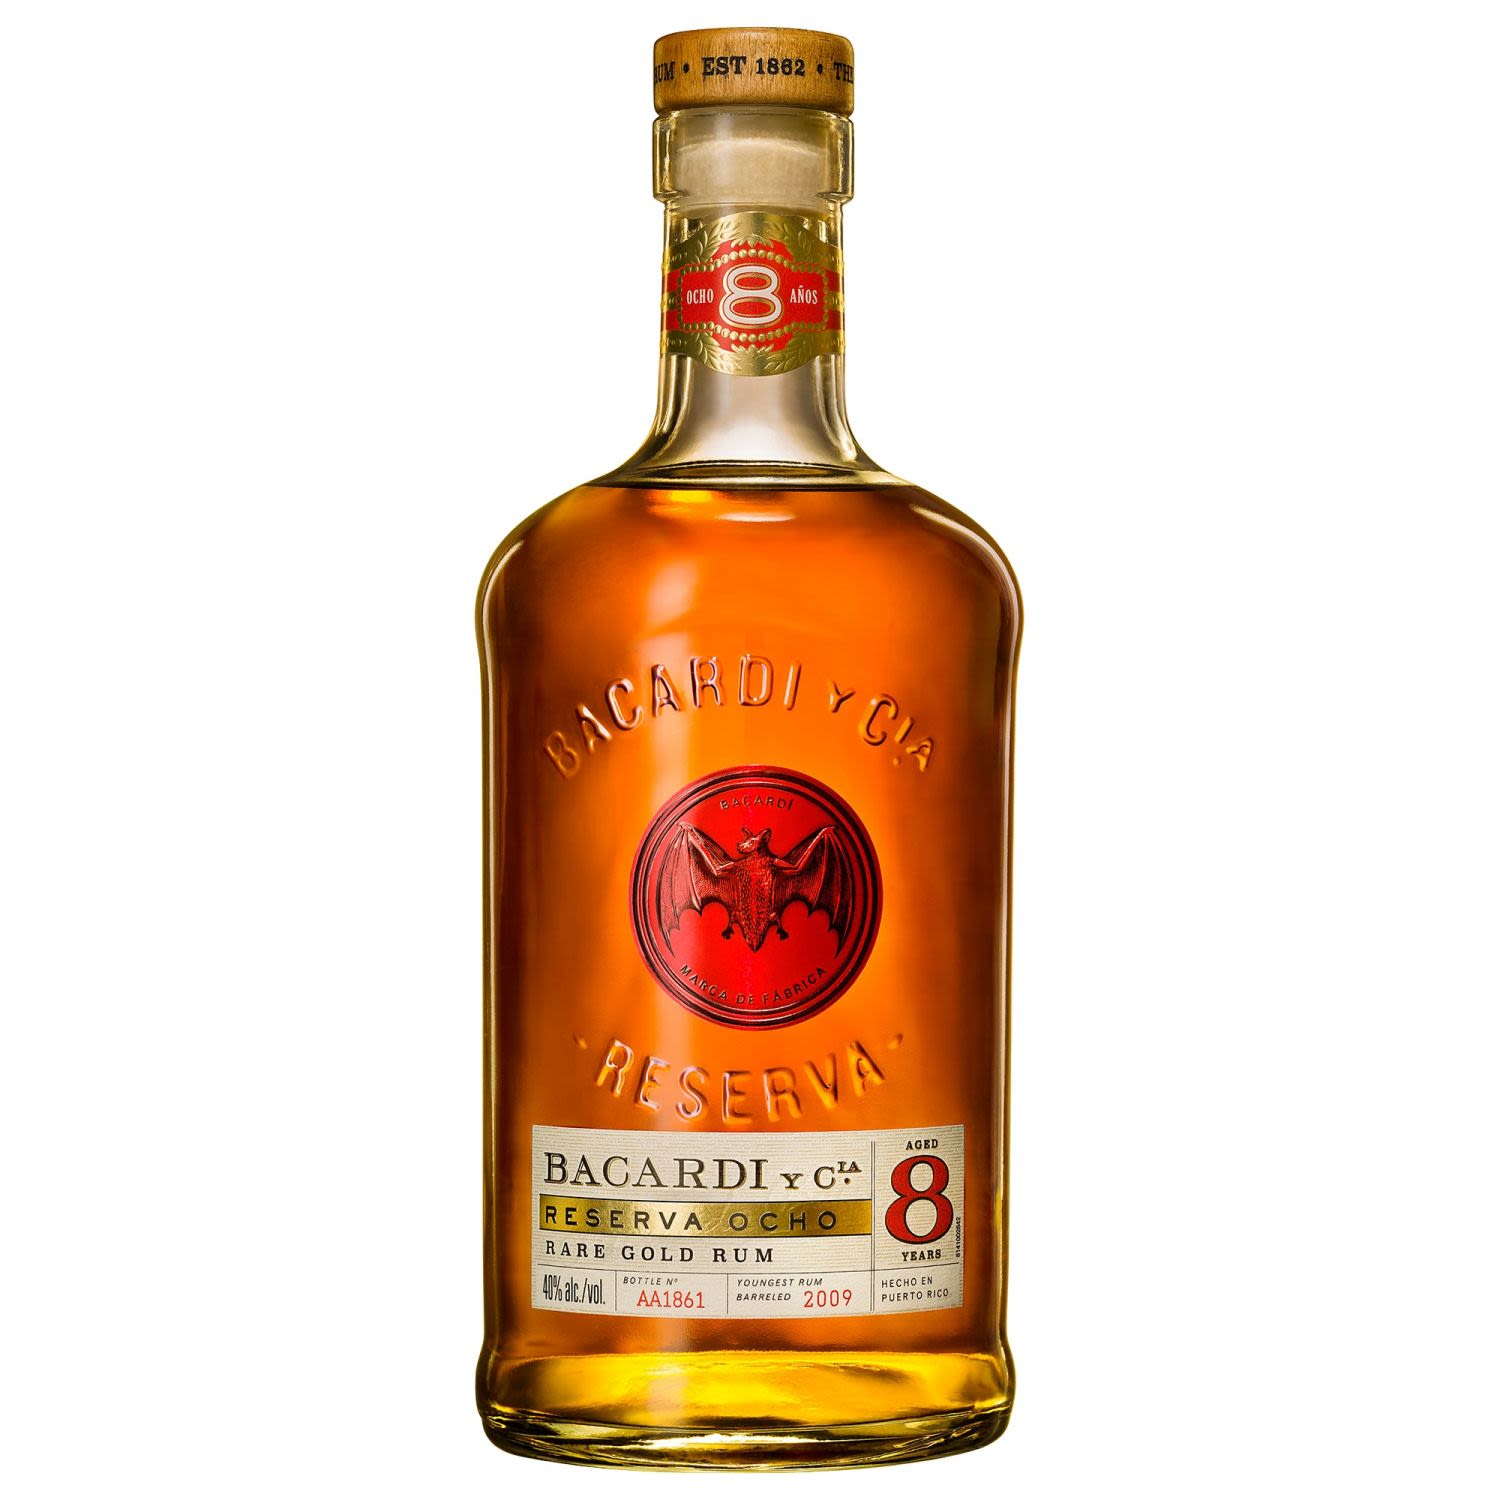 Aged for at least 8 years in selected oak barrels. Bacardi 8 is blended to give a smooth, rich and full palate with a long finish.<br /> <br />Alcohol Volume: 40.00%<br /><br />Pack Format: Bottle<br /><br />Standard Drinks: 22.1</br /><br />Pack Type: Bottle<br /><br />Country of Origin: Puerto Rico<br />